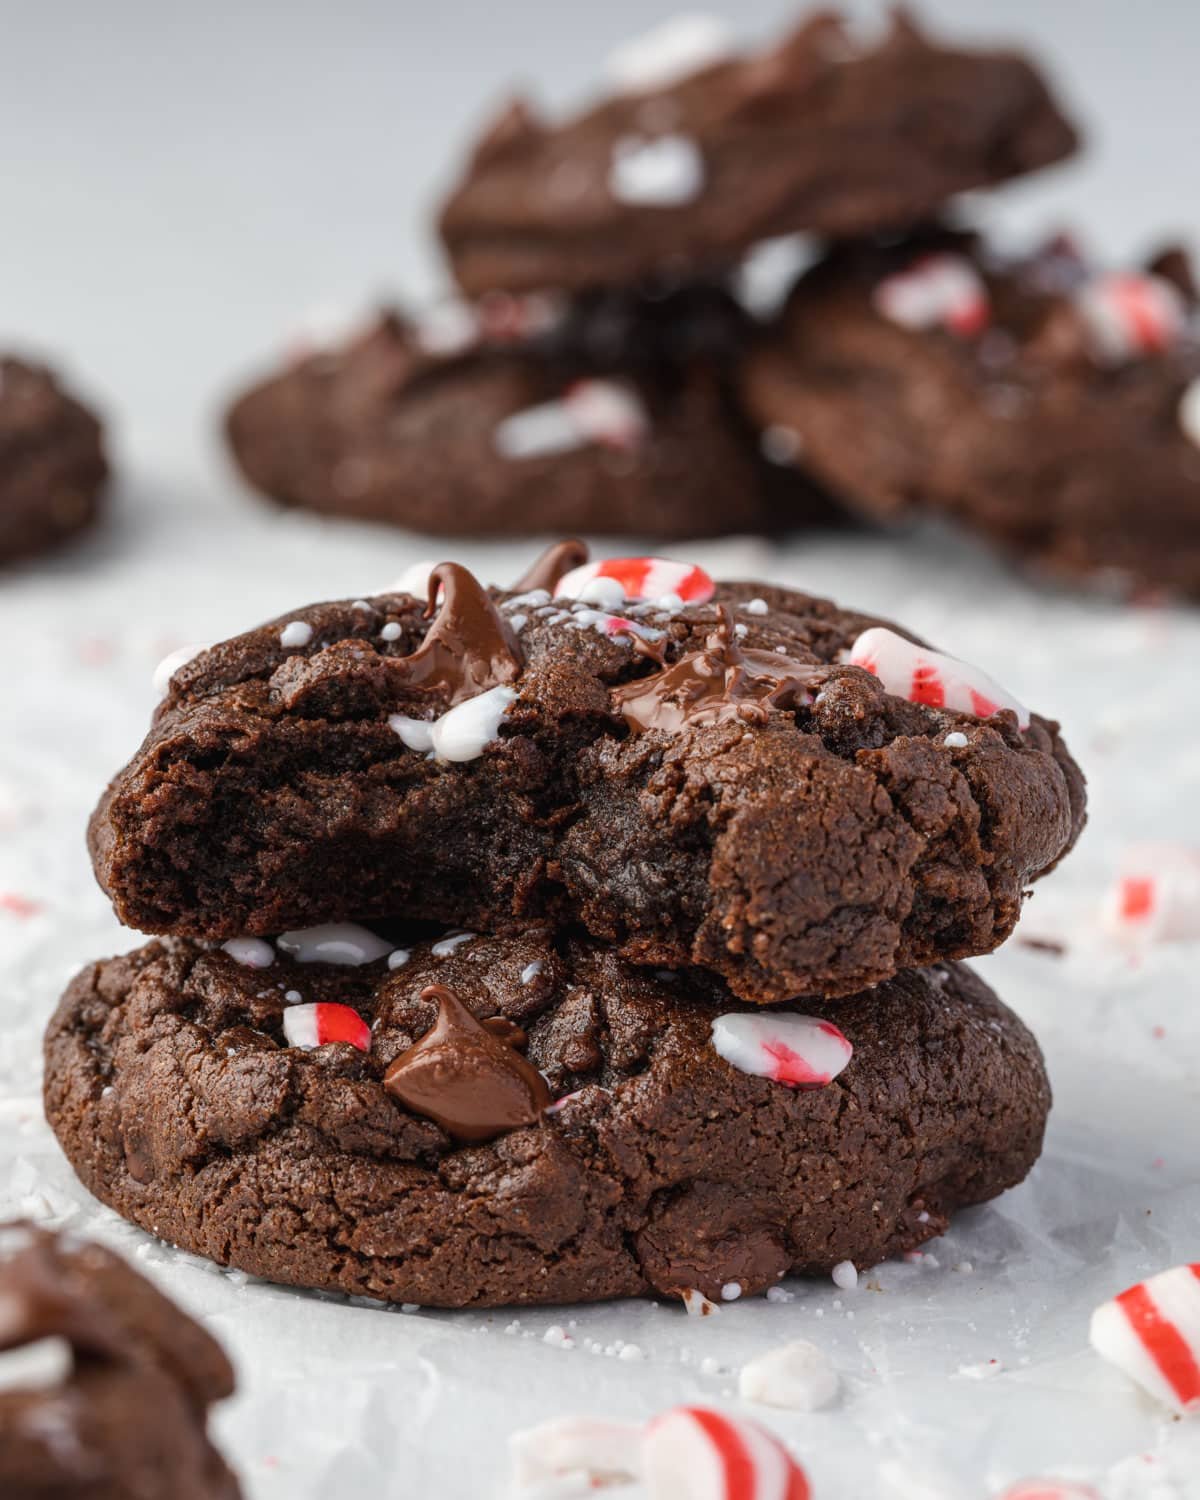 Stacks of double chocolate peppermint cookies, with crushed peppermints and melty chocolate chips.